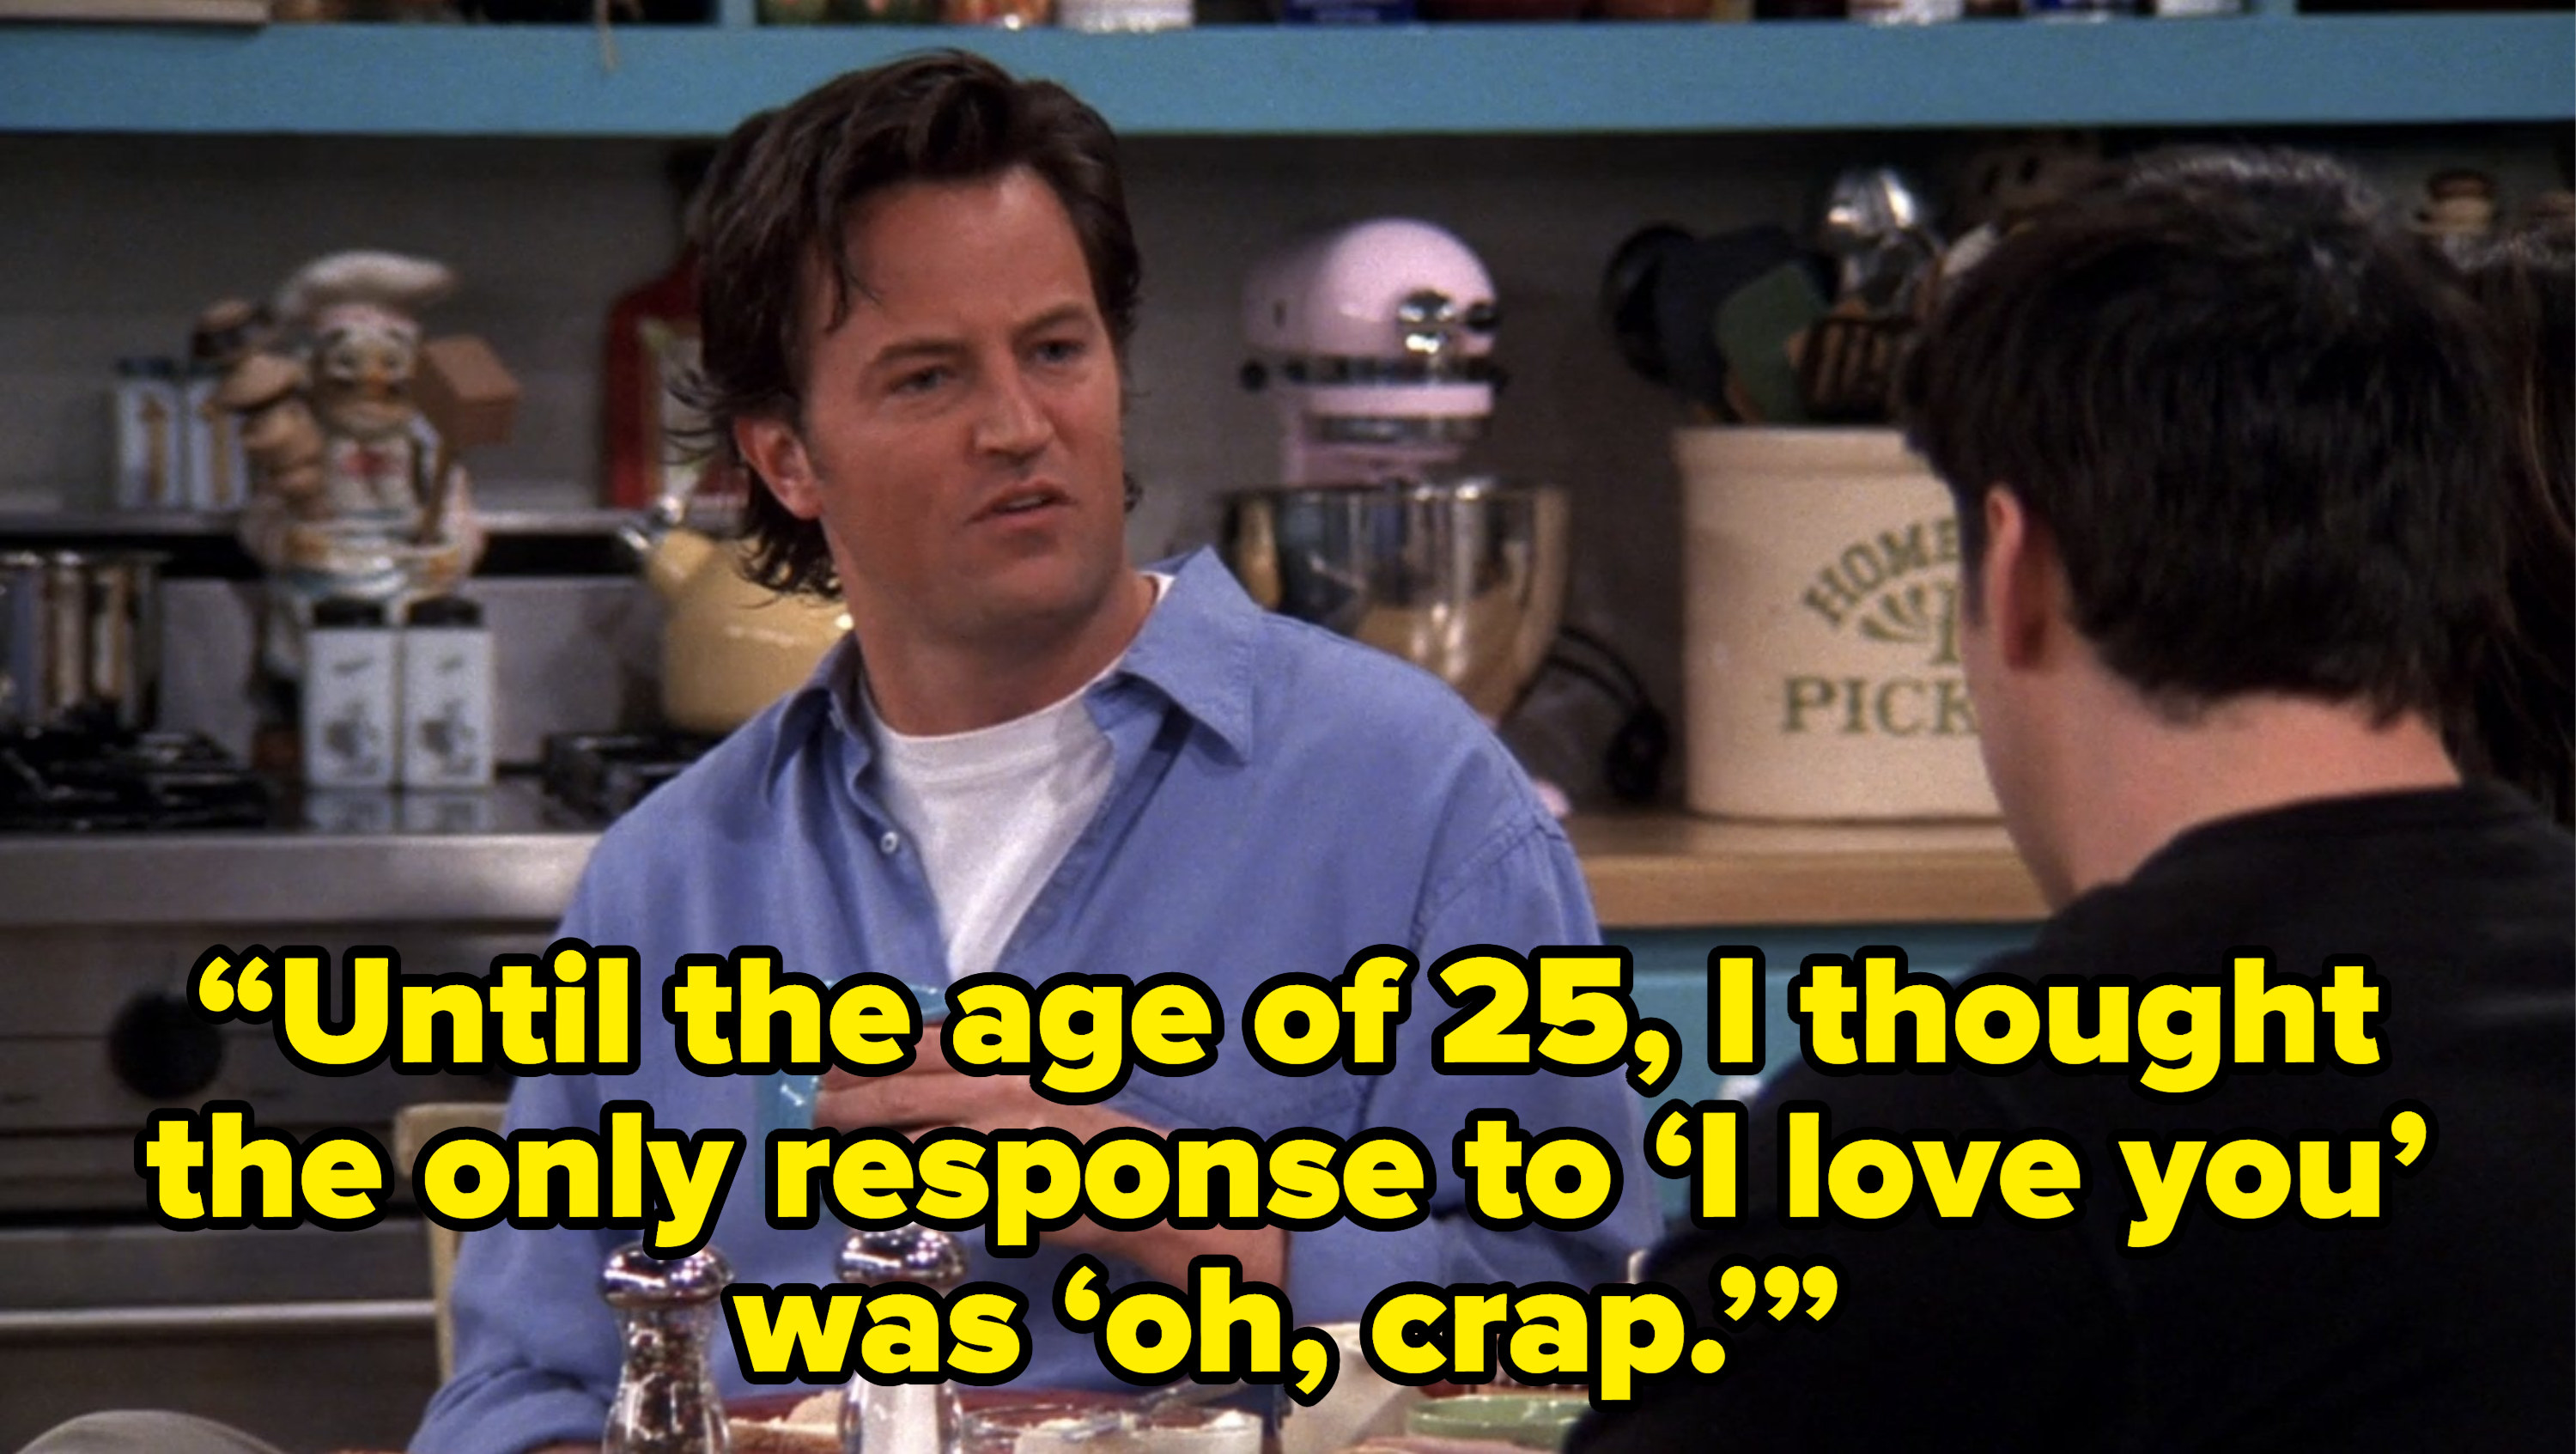 chandler telling joey “Until the age of 25, I thought the only response to ‘I love you’ was ‘oh, crap.’” on friends